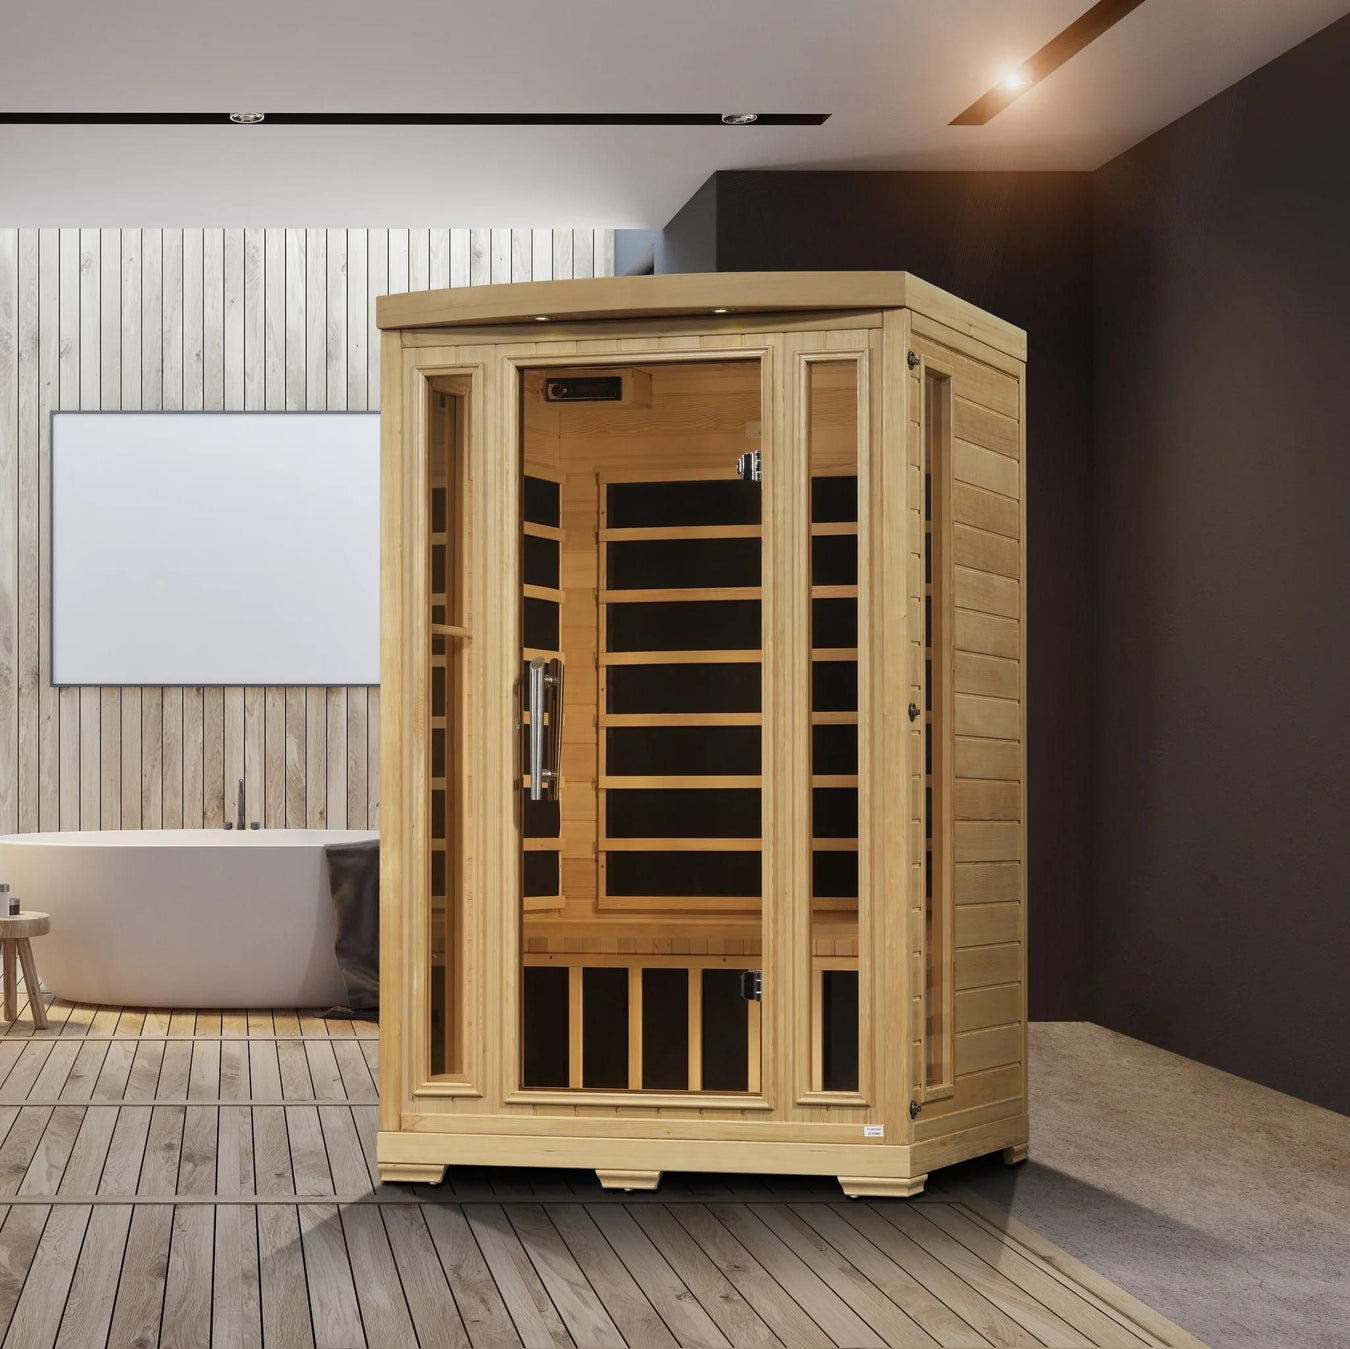 Lifestyle image of a two person indoor sauna.